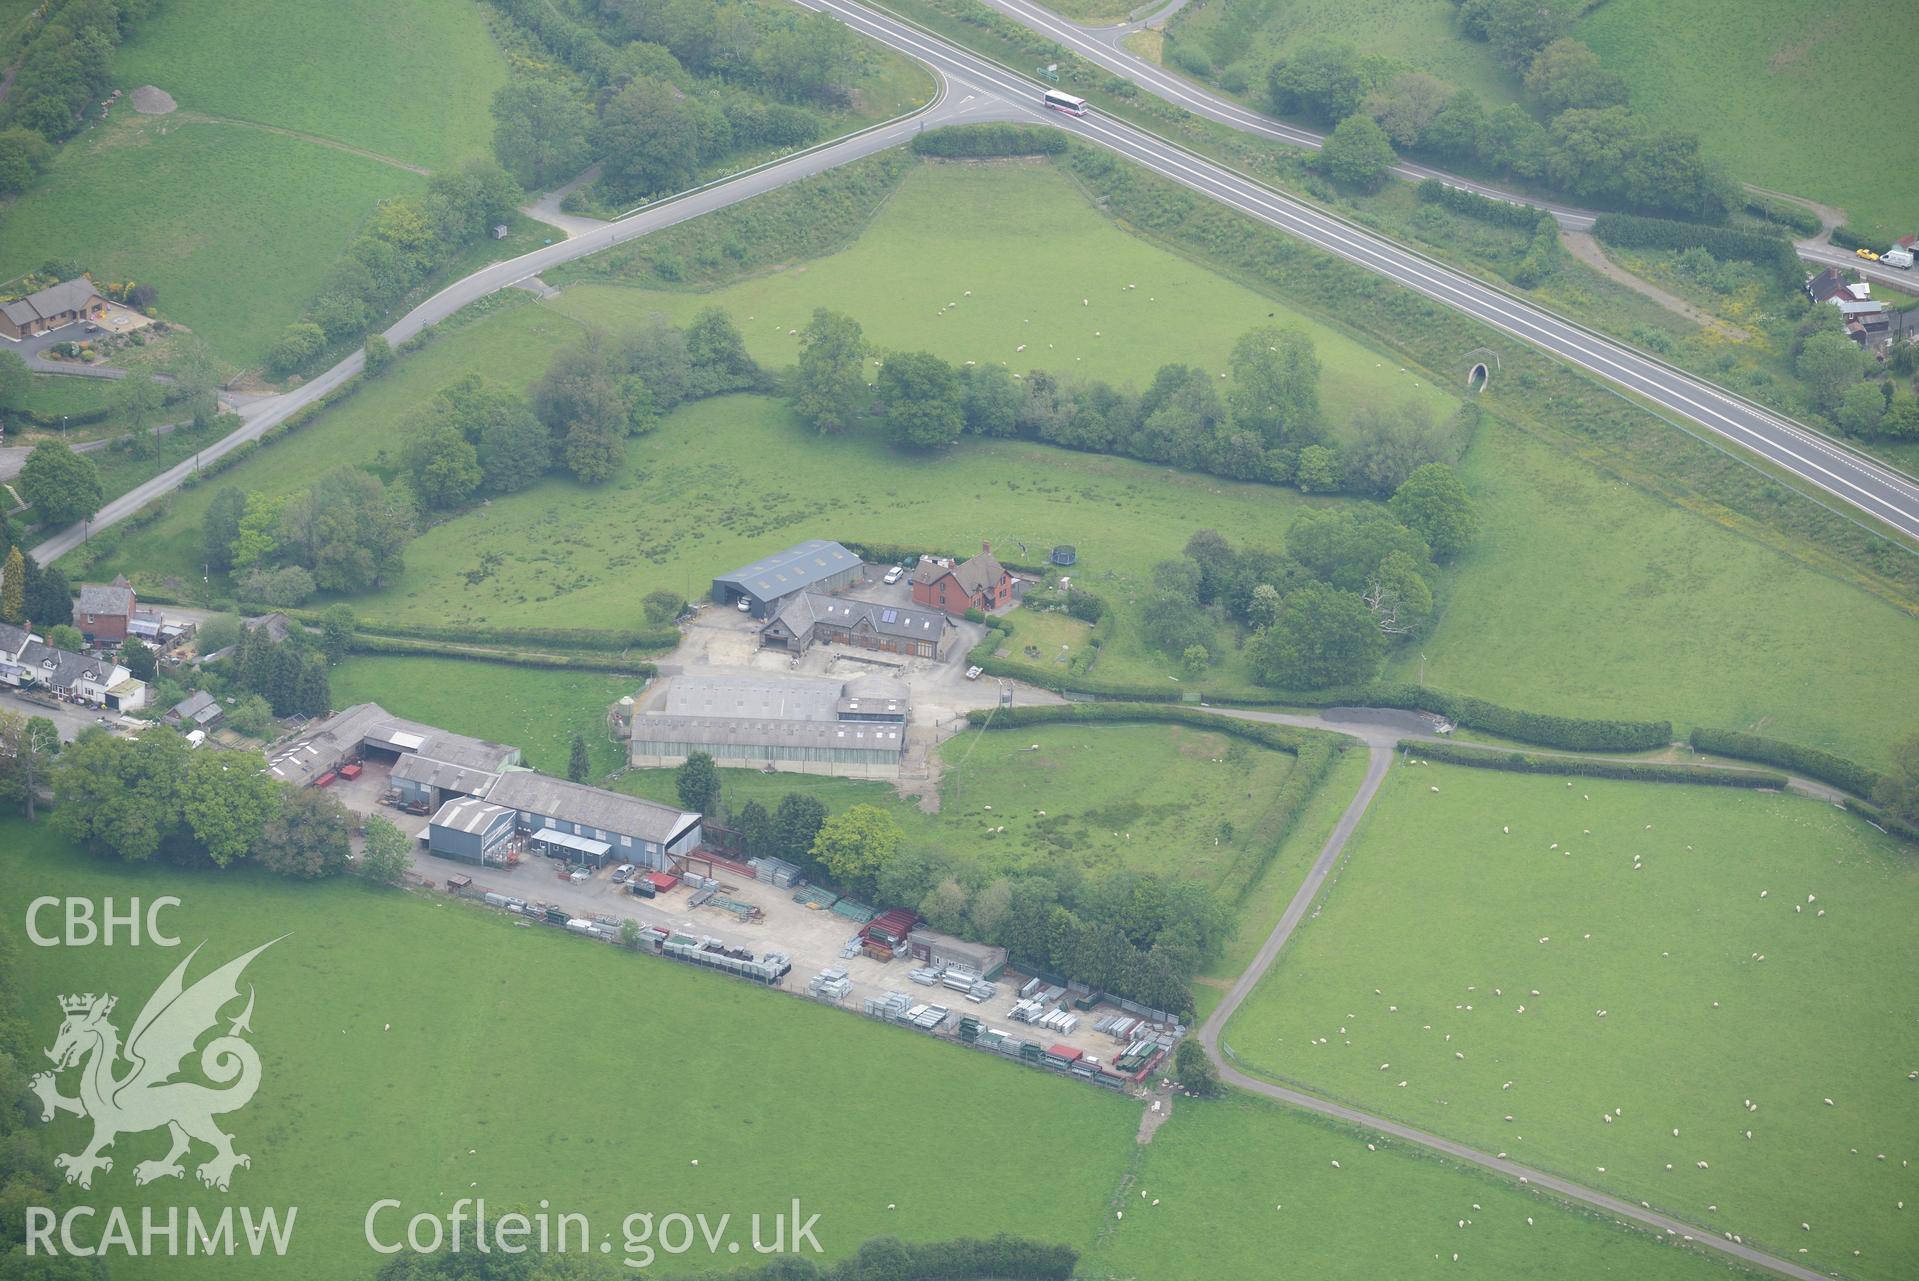 Cwrt Llechryd farm range, garden and defended enclosure or moat, Llanelwedd. Oblique aerial photograph taken during the Royal Commission's programme of archaeological aerial reconnaissance by Toby Driver on 11th June 2015.